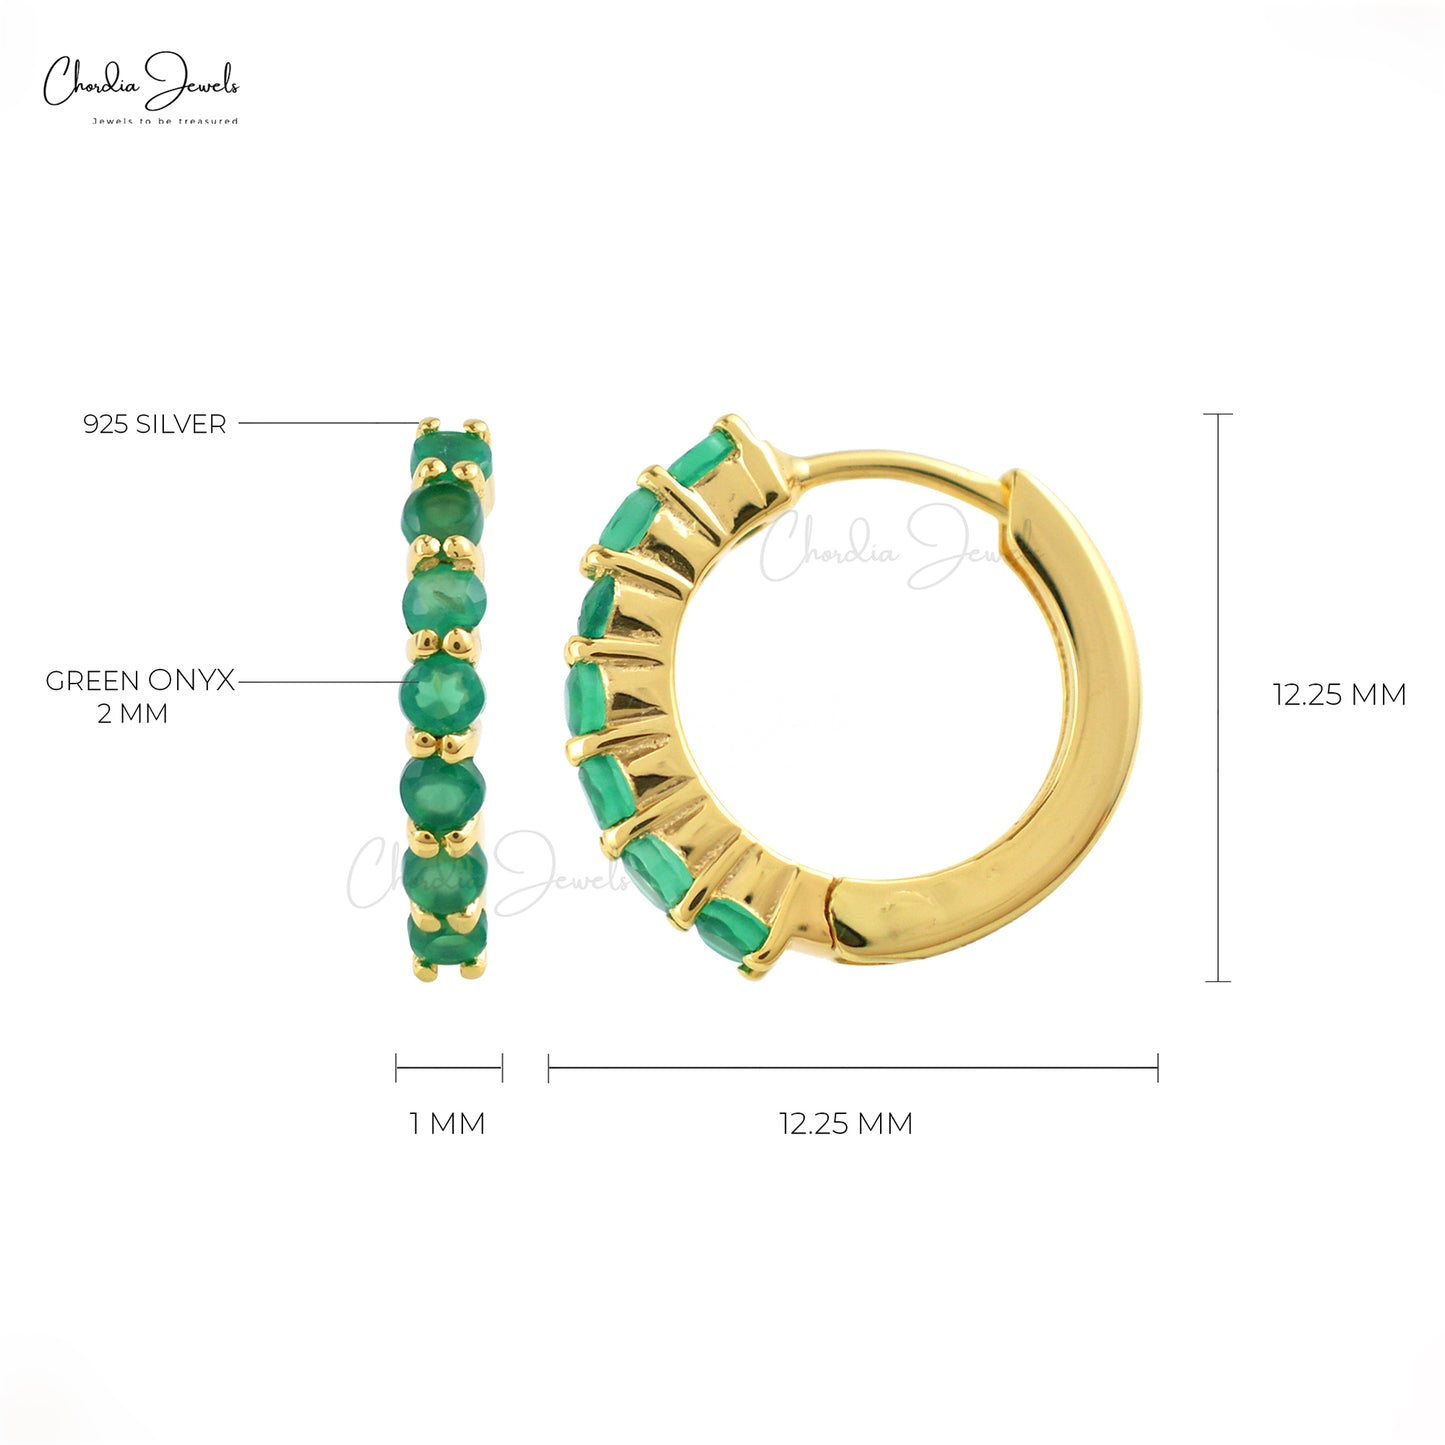 Load image into Gallery viewer, Best Quality 925 Sterling Silver Round Green Onyx Gemstone Hoop Earrings From Top Wholesaler At Factory Price
